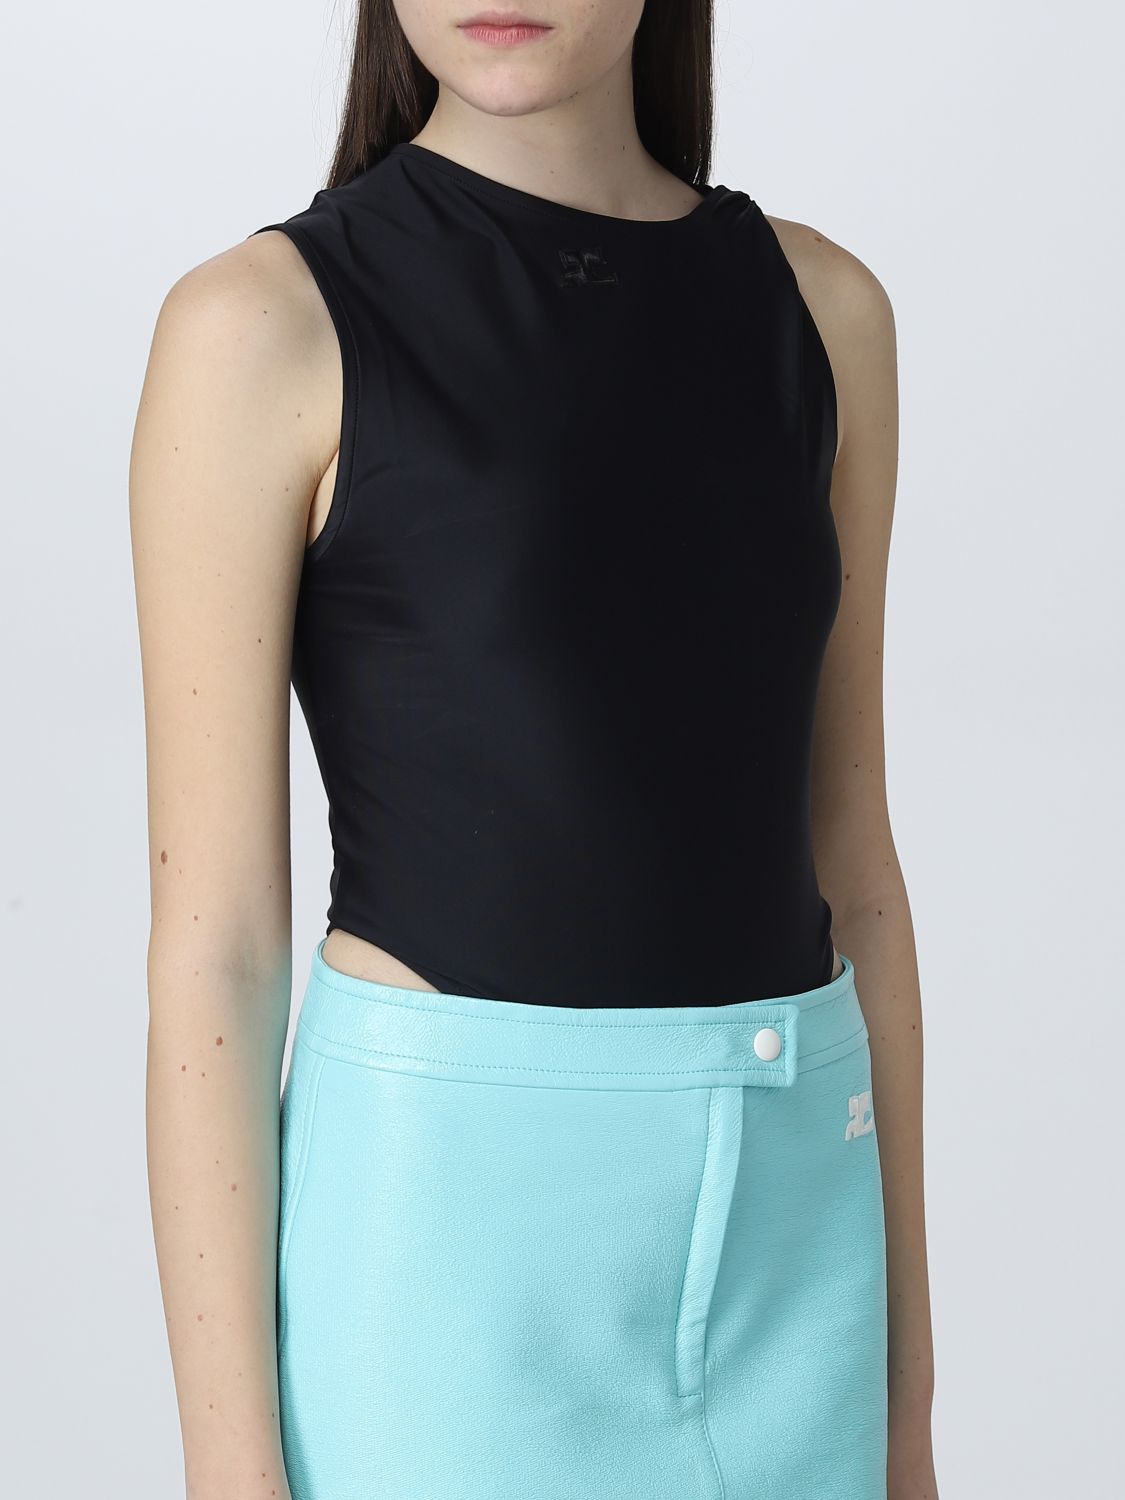 Body Courrèges: Body Courrèges para mujer negro 6